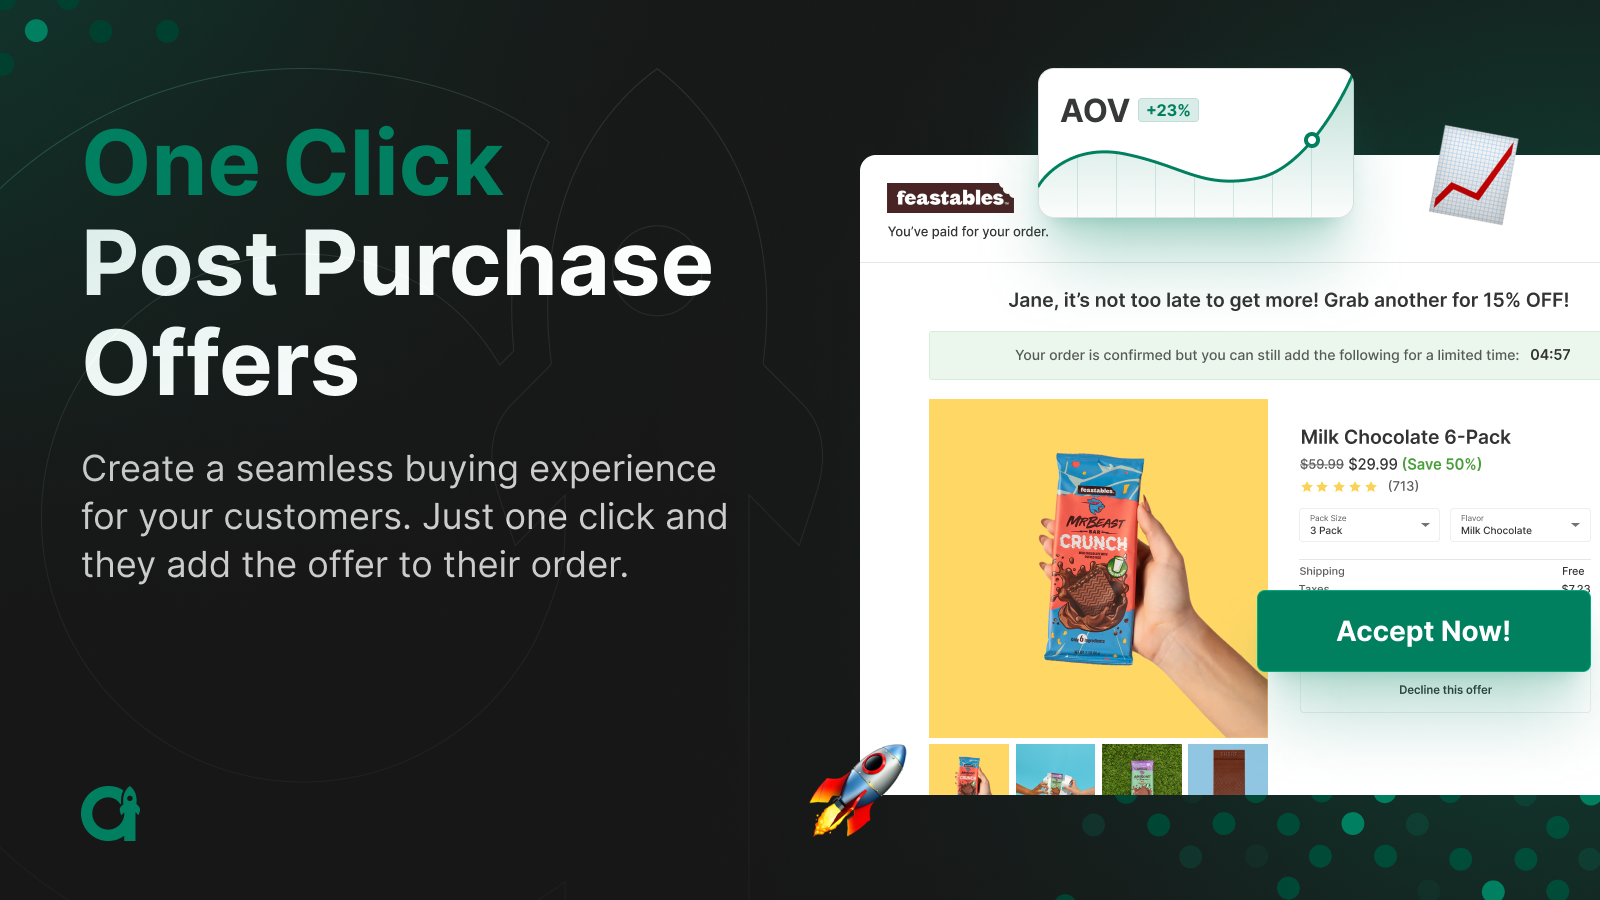 One Click Post Purchase Offers